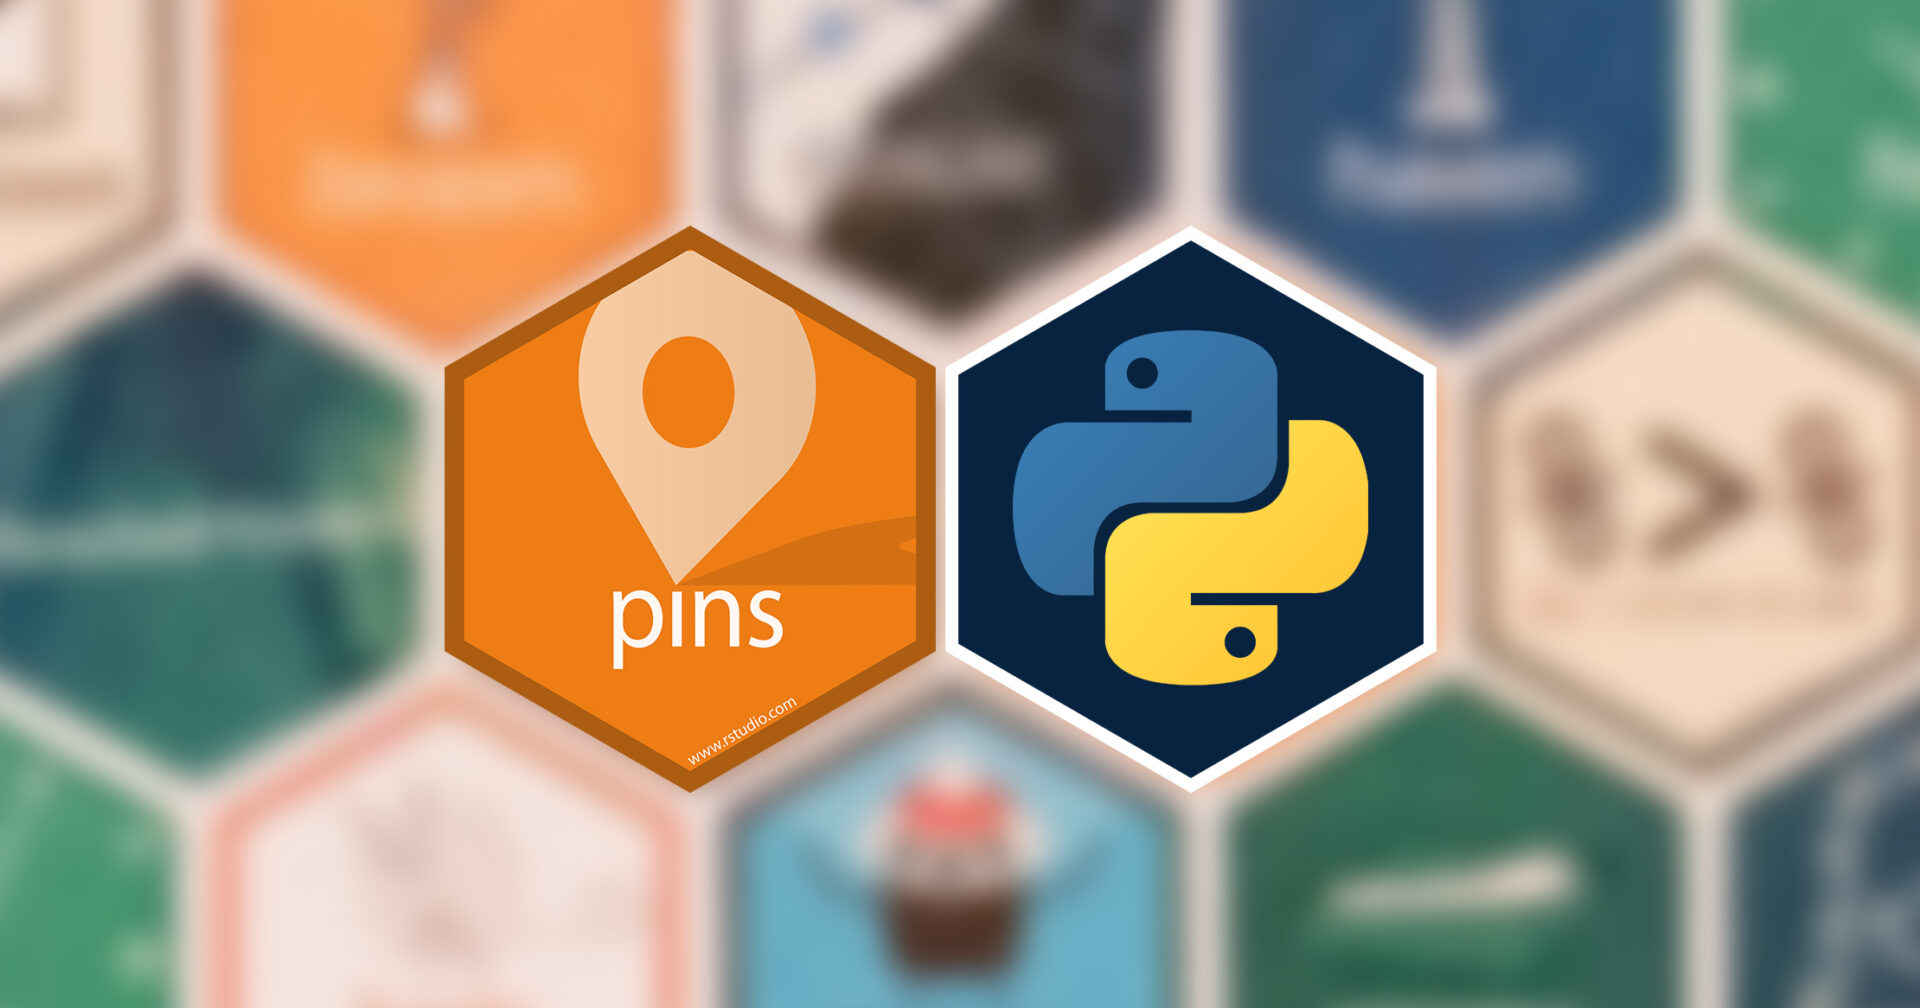 Two hex stickers: the pins hex sticker, orange with a pin, the Python logo, two intertwining snakes. The background is a fuzzy collage of other hex stickers.